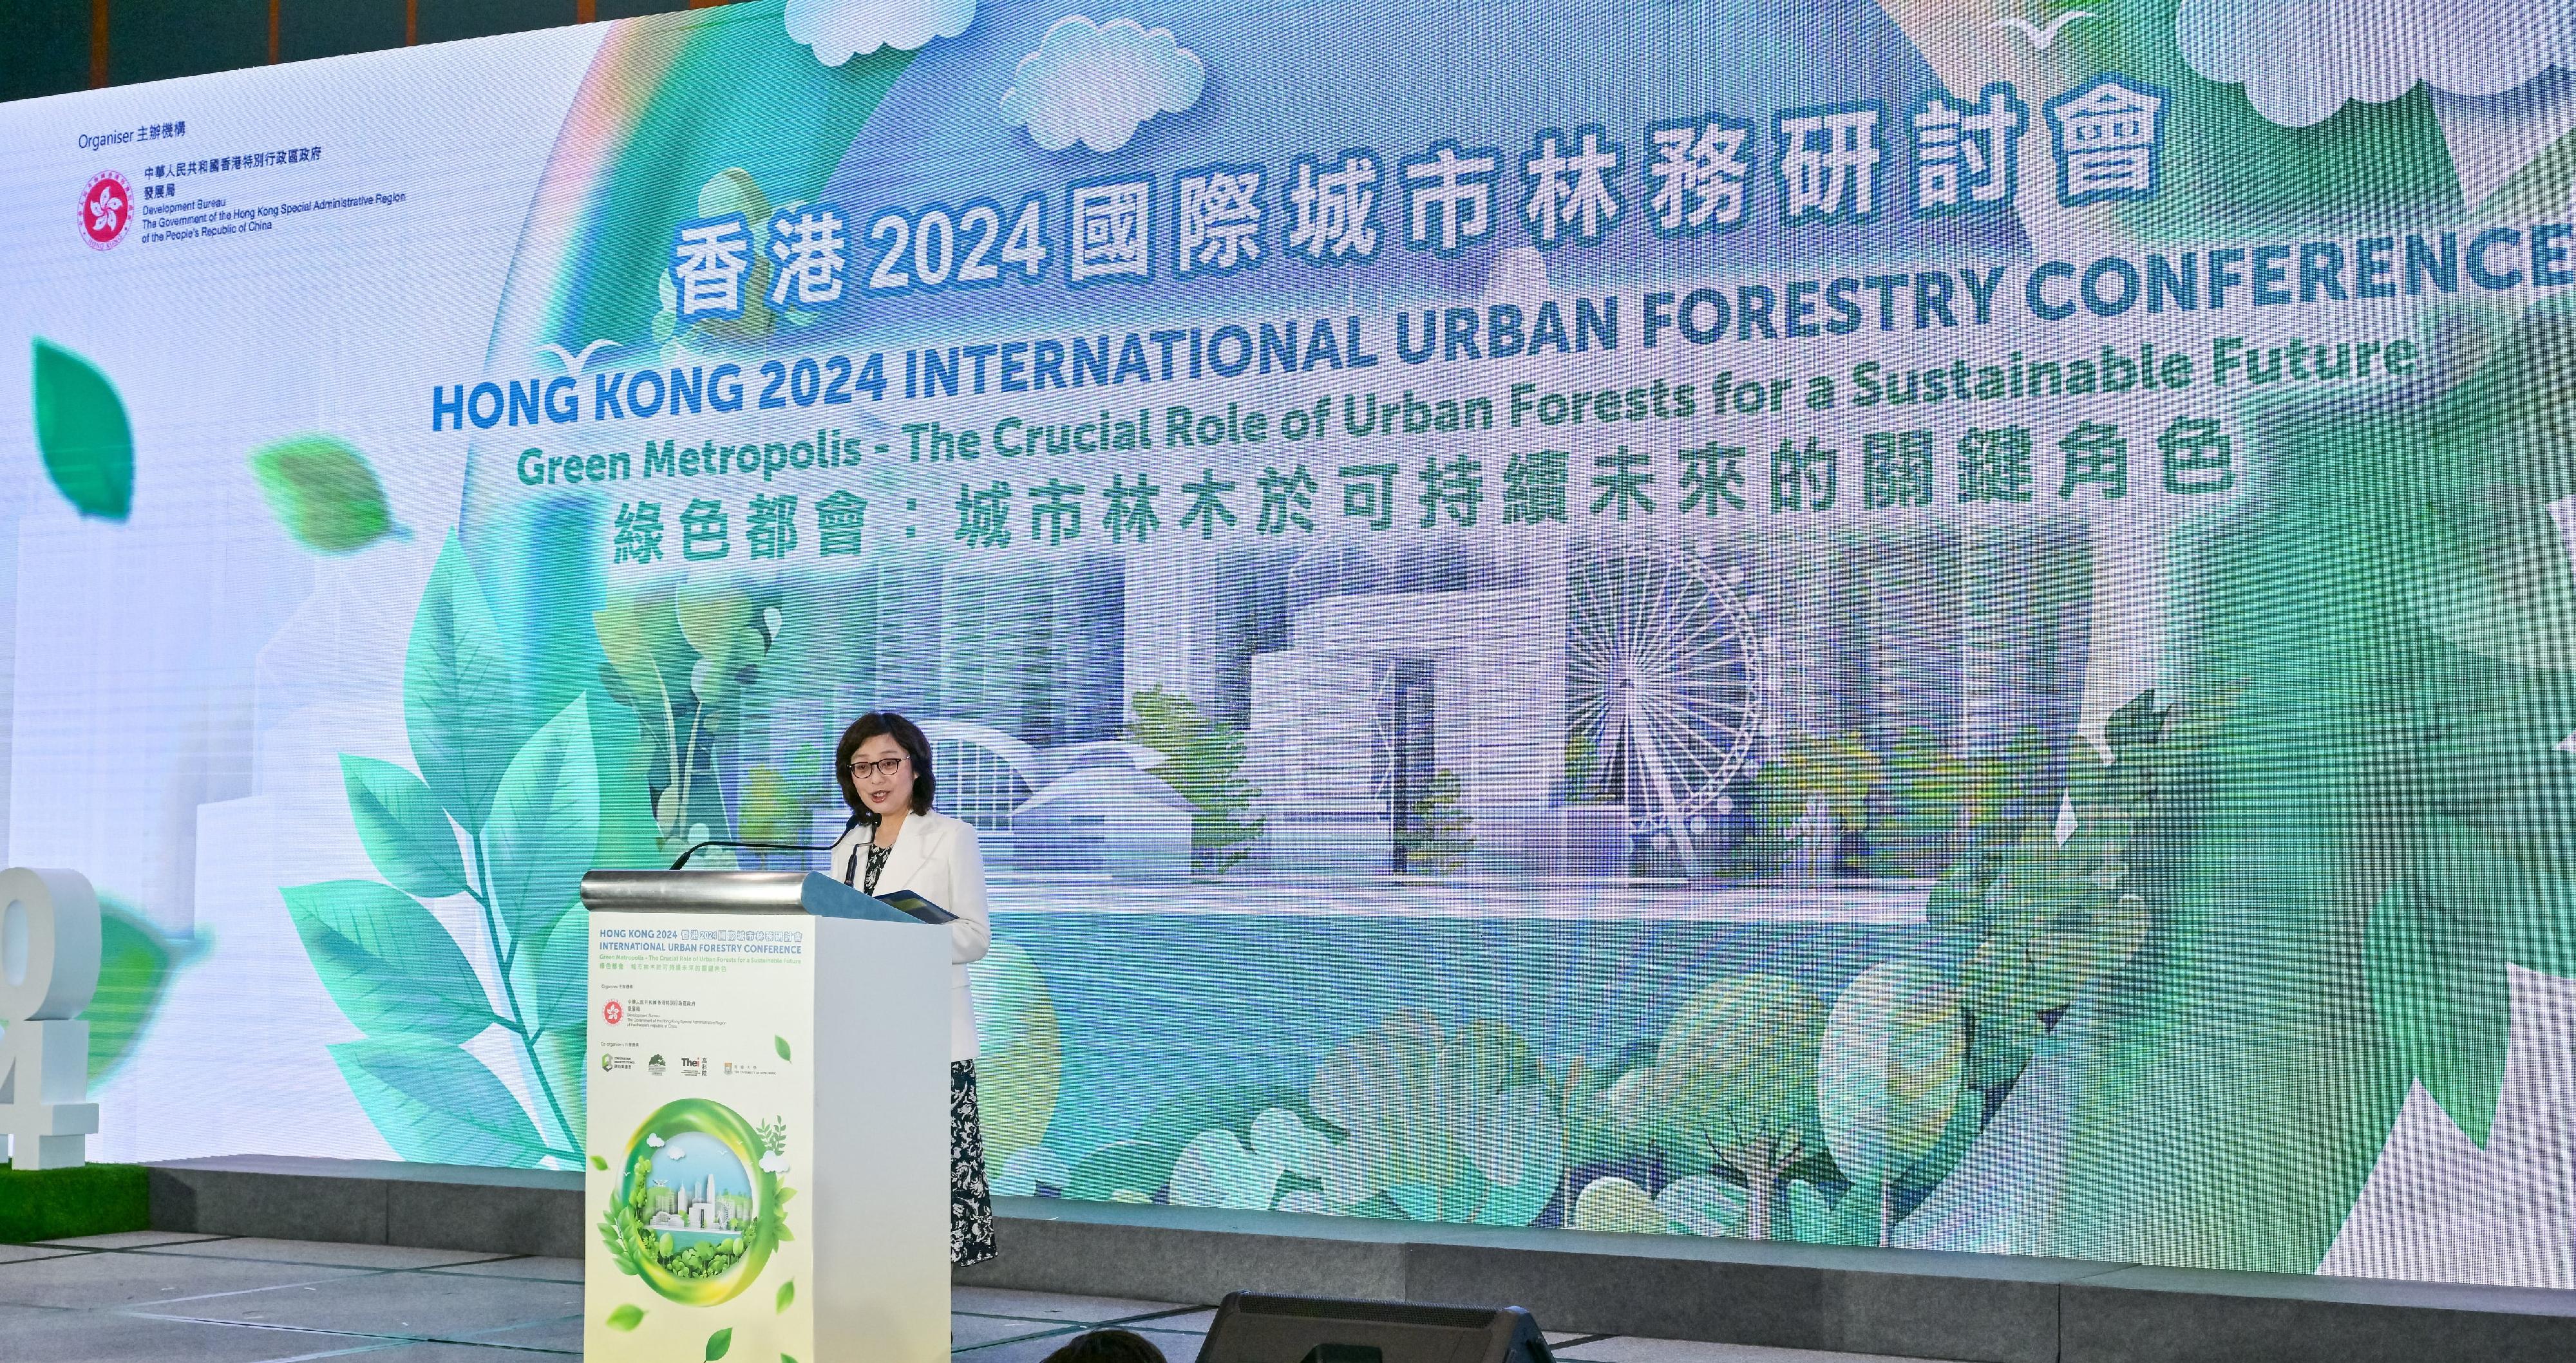 The Hong Kong 2024 International Urban Forestry Conference opened at the Hong Kong Science Park today (April 10). Photo shows the Secretary for Development, Ms Bernadette Linn, delivering welcome remarks at the opening ceremony.